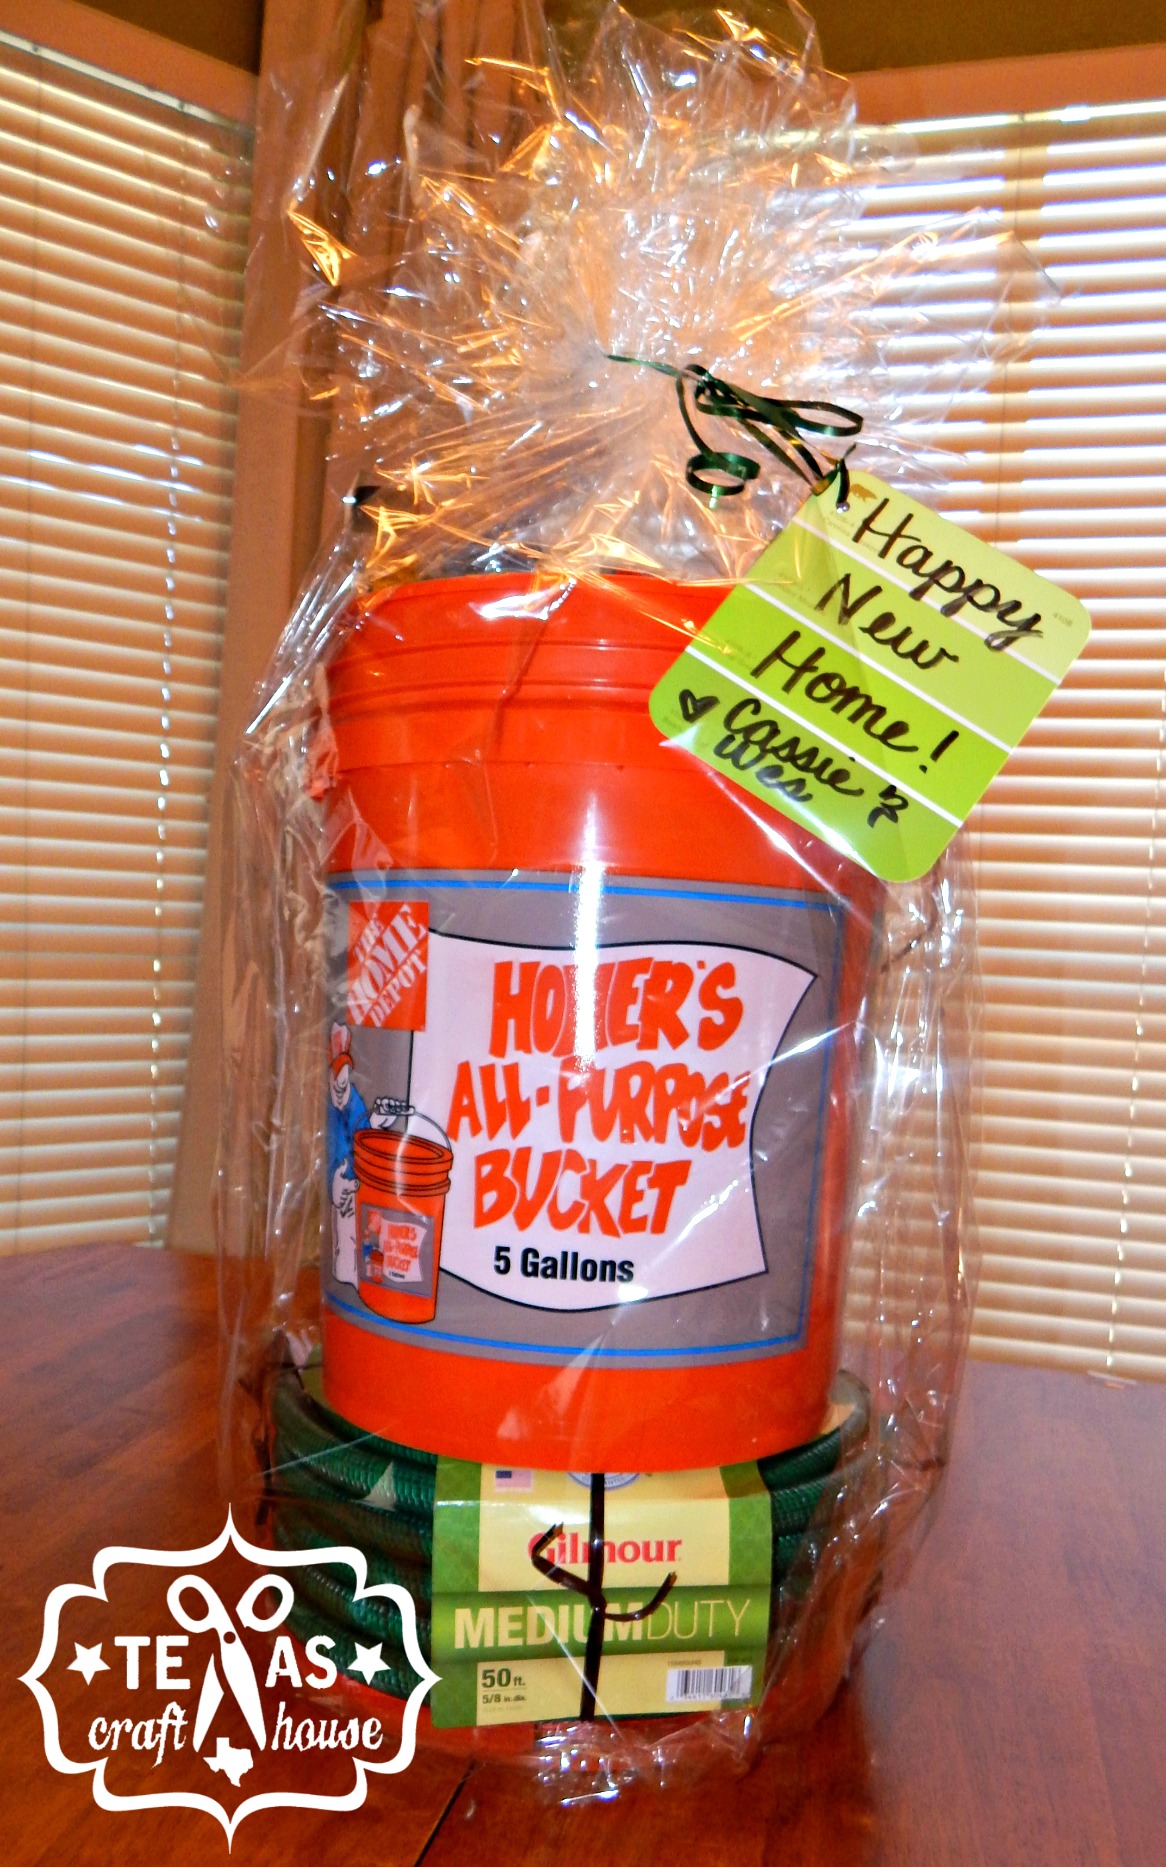 {Texas Craft House} House warming bucket gift with lots of great ideas to fill it with